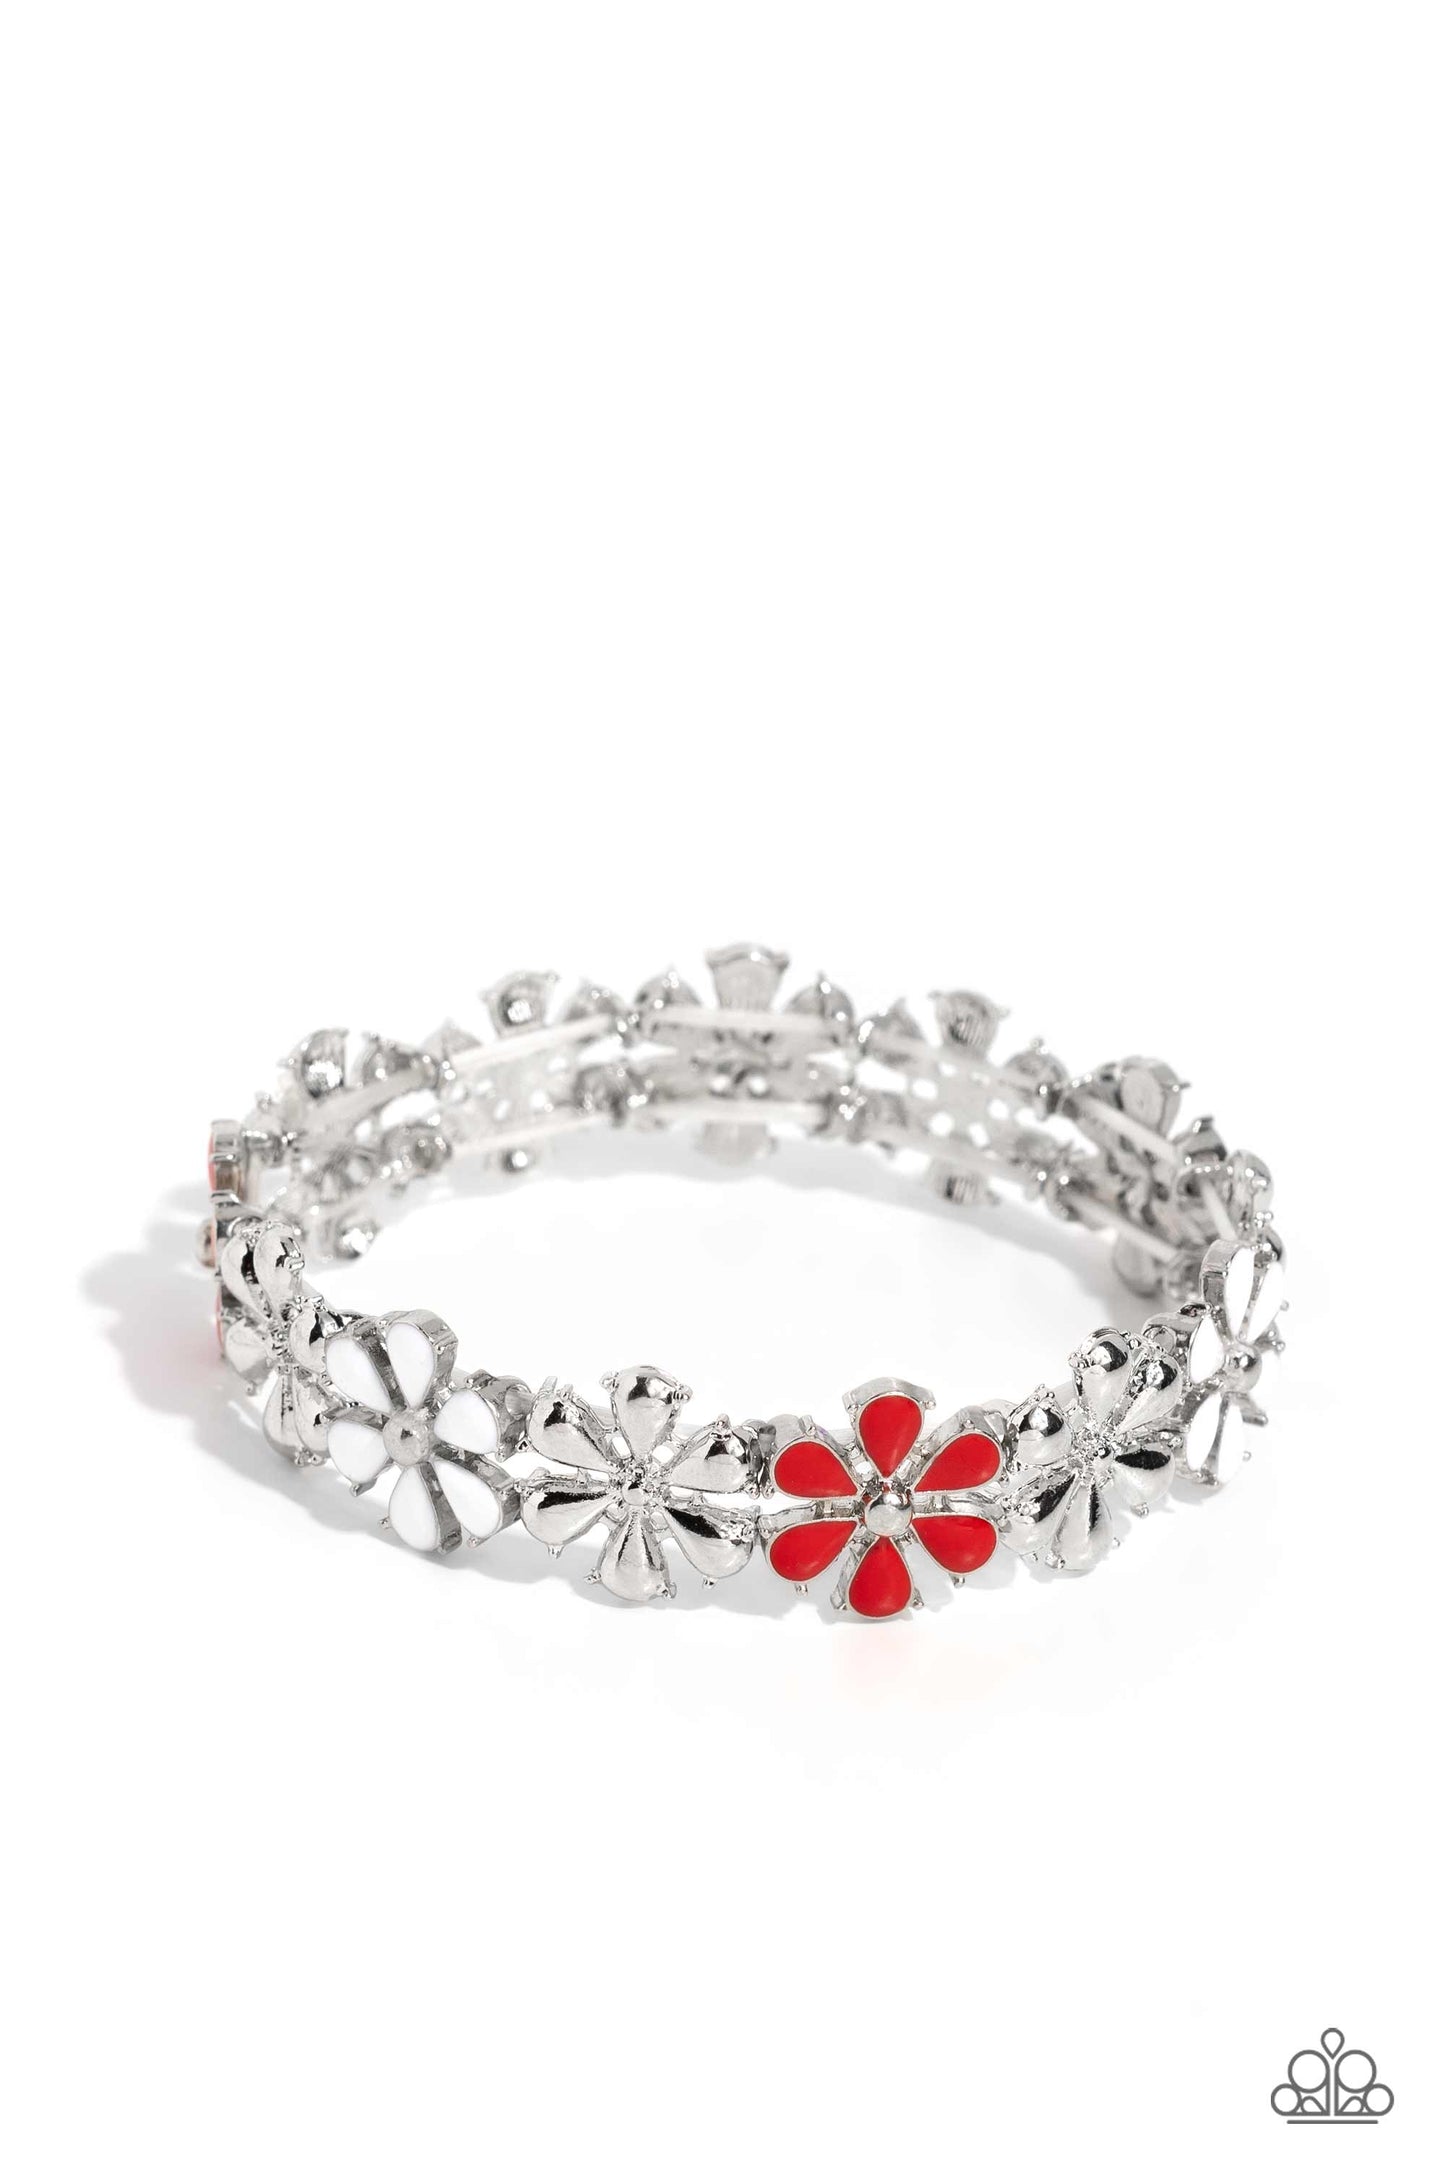 Floral Fair Red Stretch Bracelet - Paparazzi Accessories  Painted in vivacious shades of red and white, a collection of silver studded flowers alternating with high-sheen silver flowers glides across the wrist from an elastic stretchy band for a whimsical array.  Sold as one individual bracelet.  P9WH-RDXX-193PX